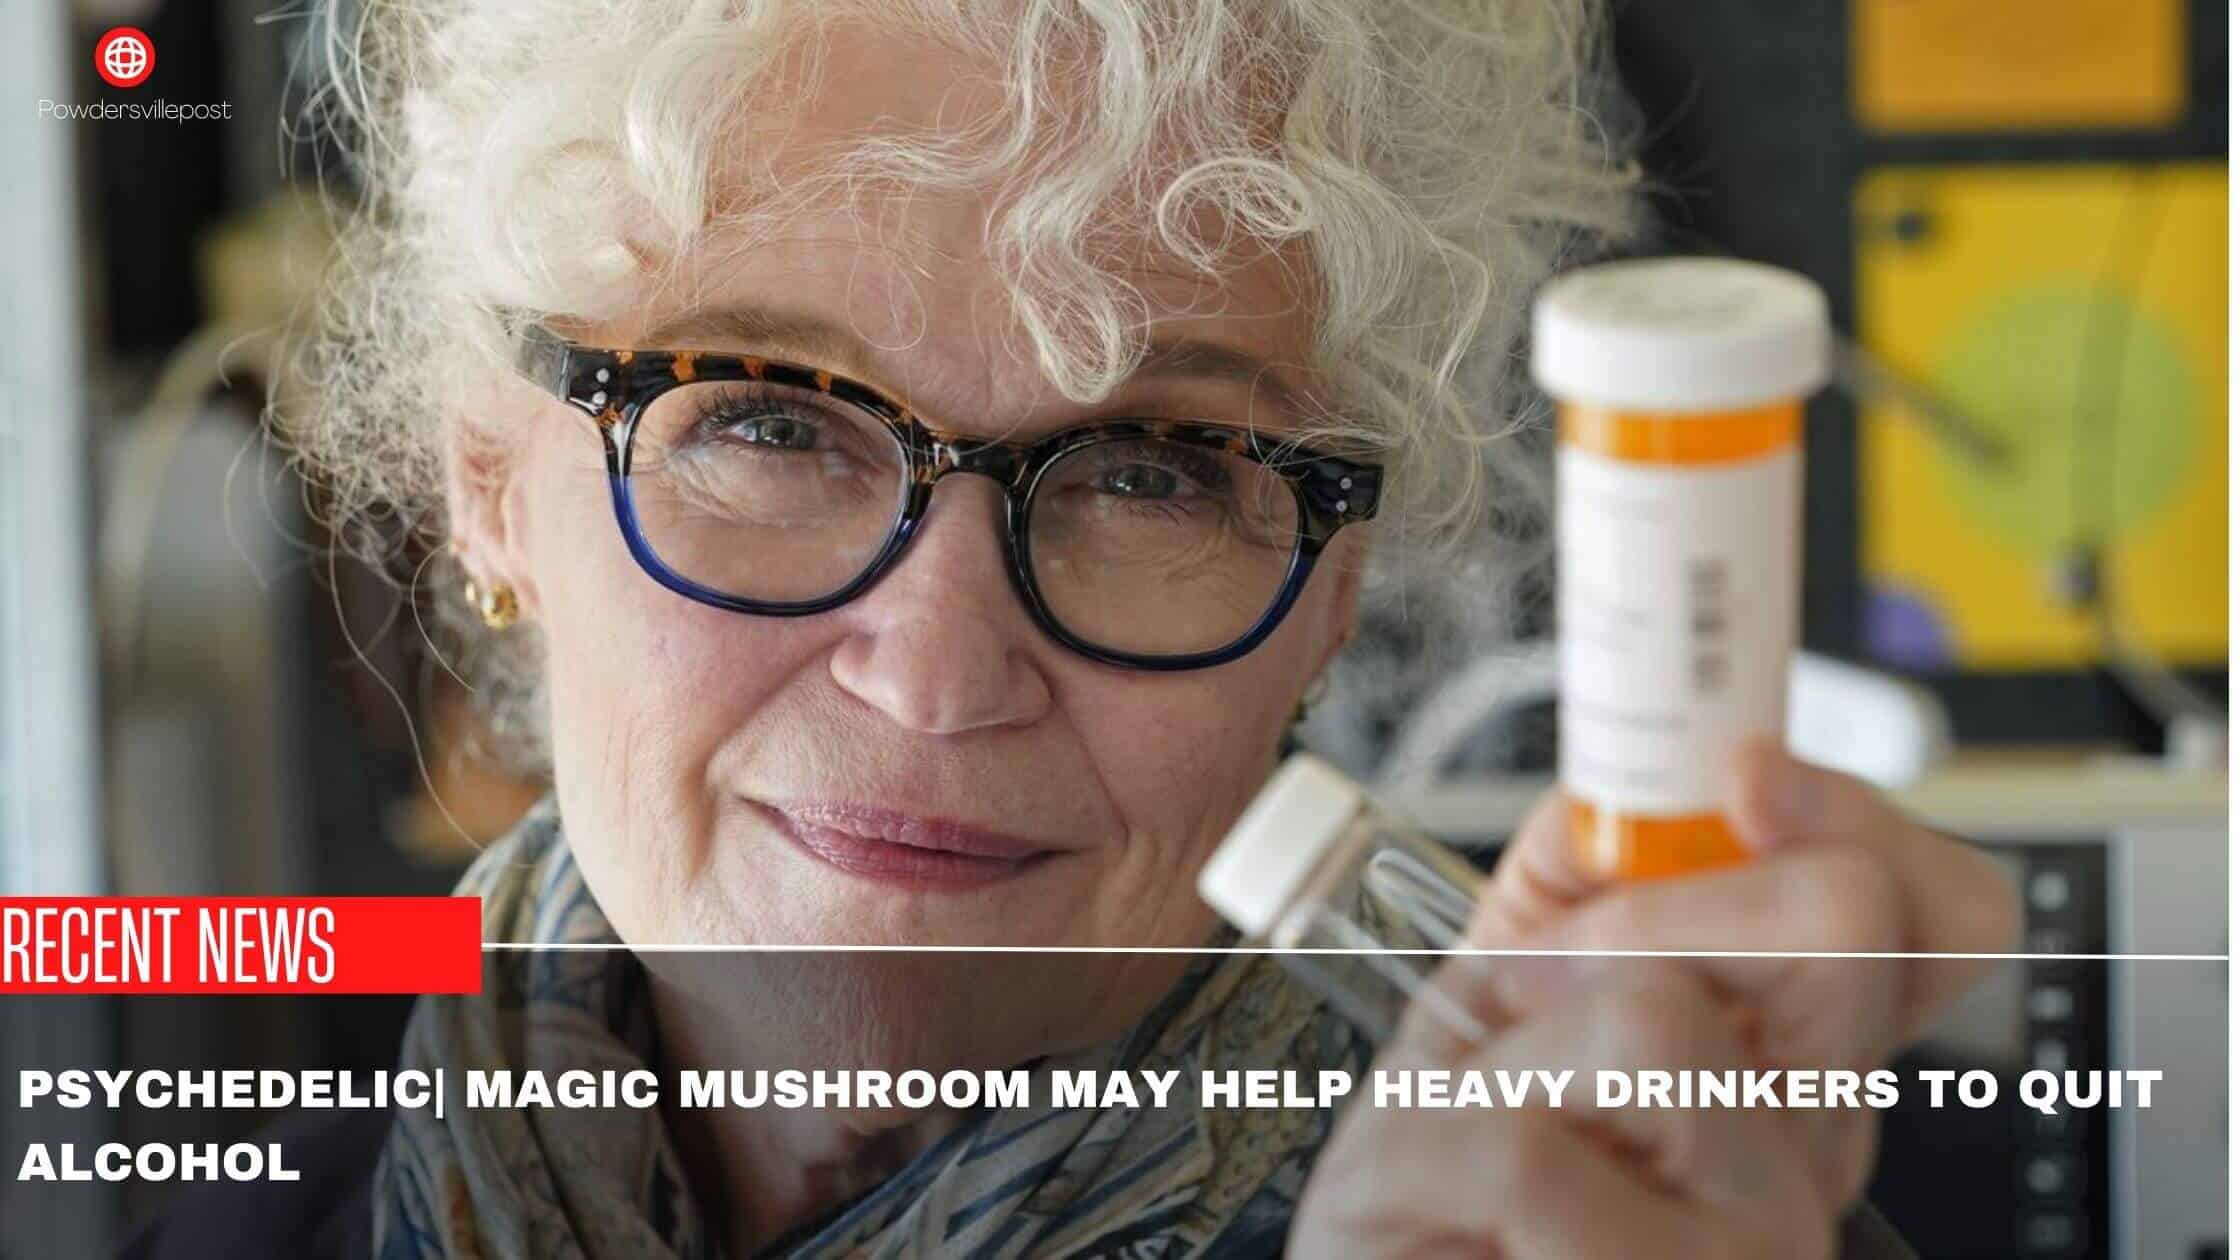 Psychedelic Magic Mushroom May Help Heavy Drinkers To Quit Alcohol